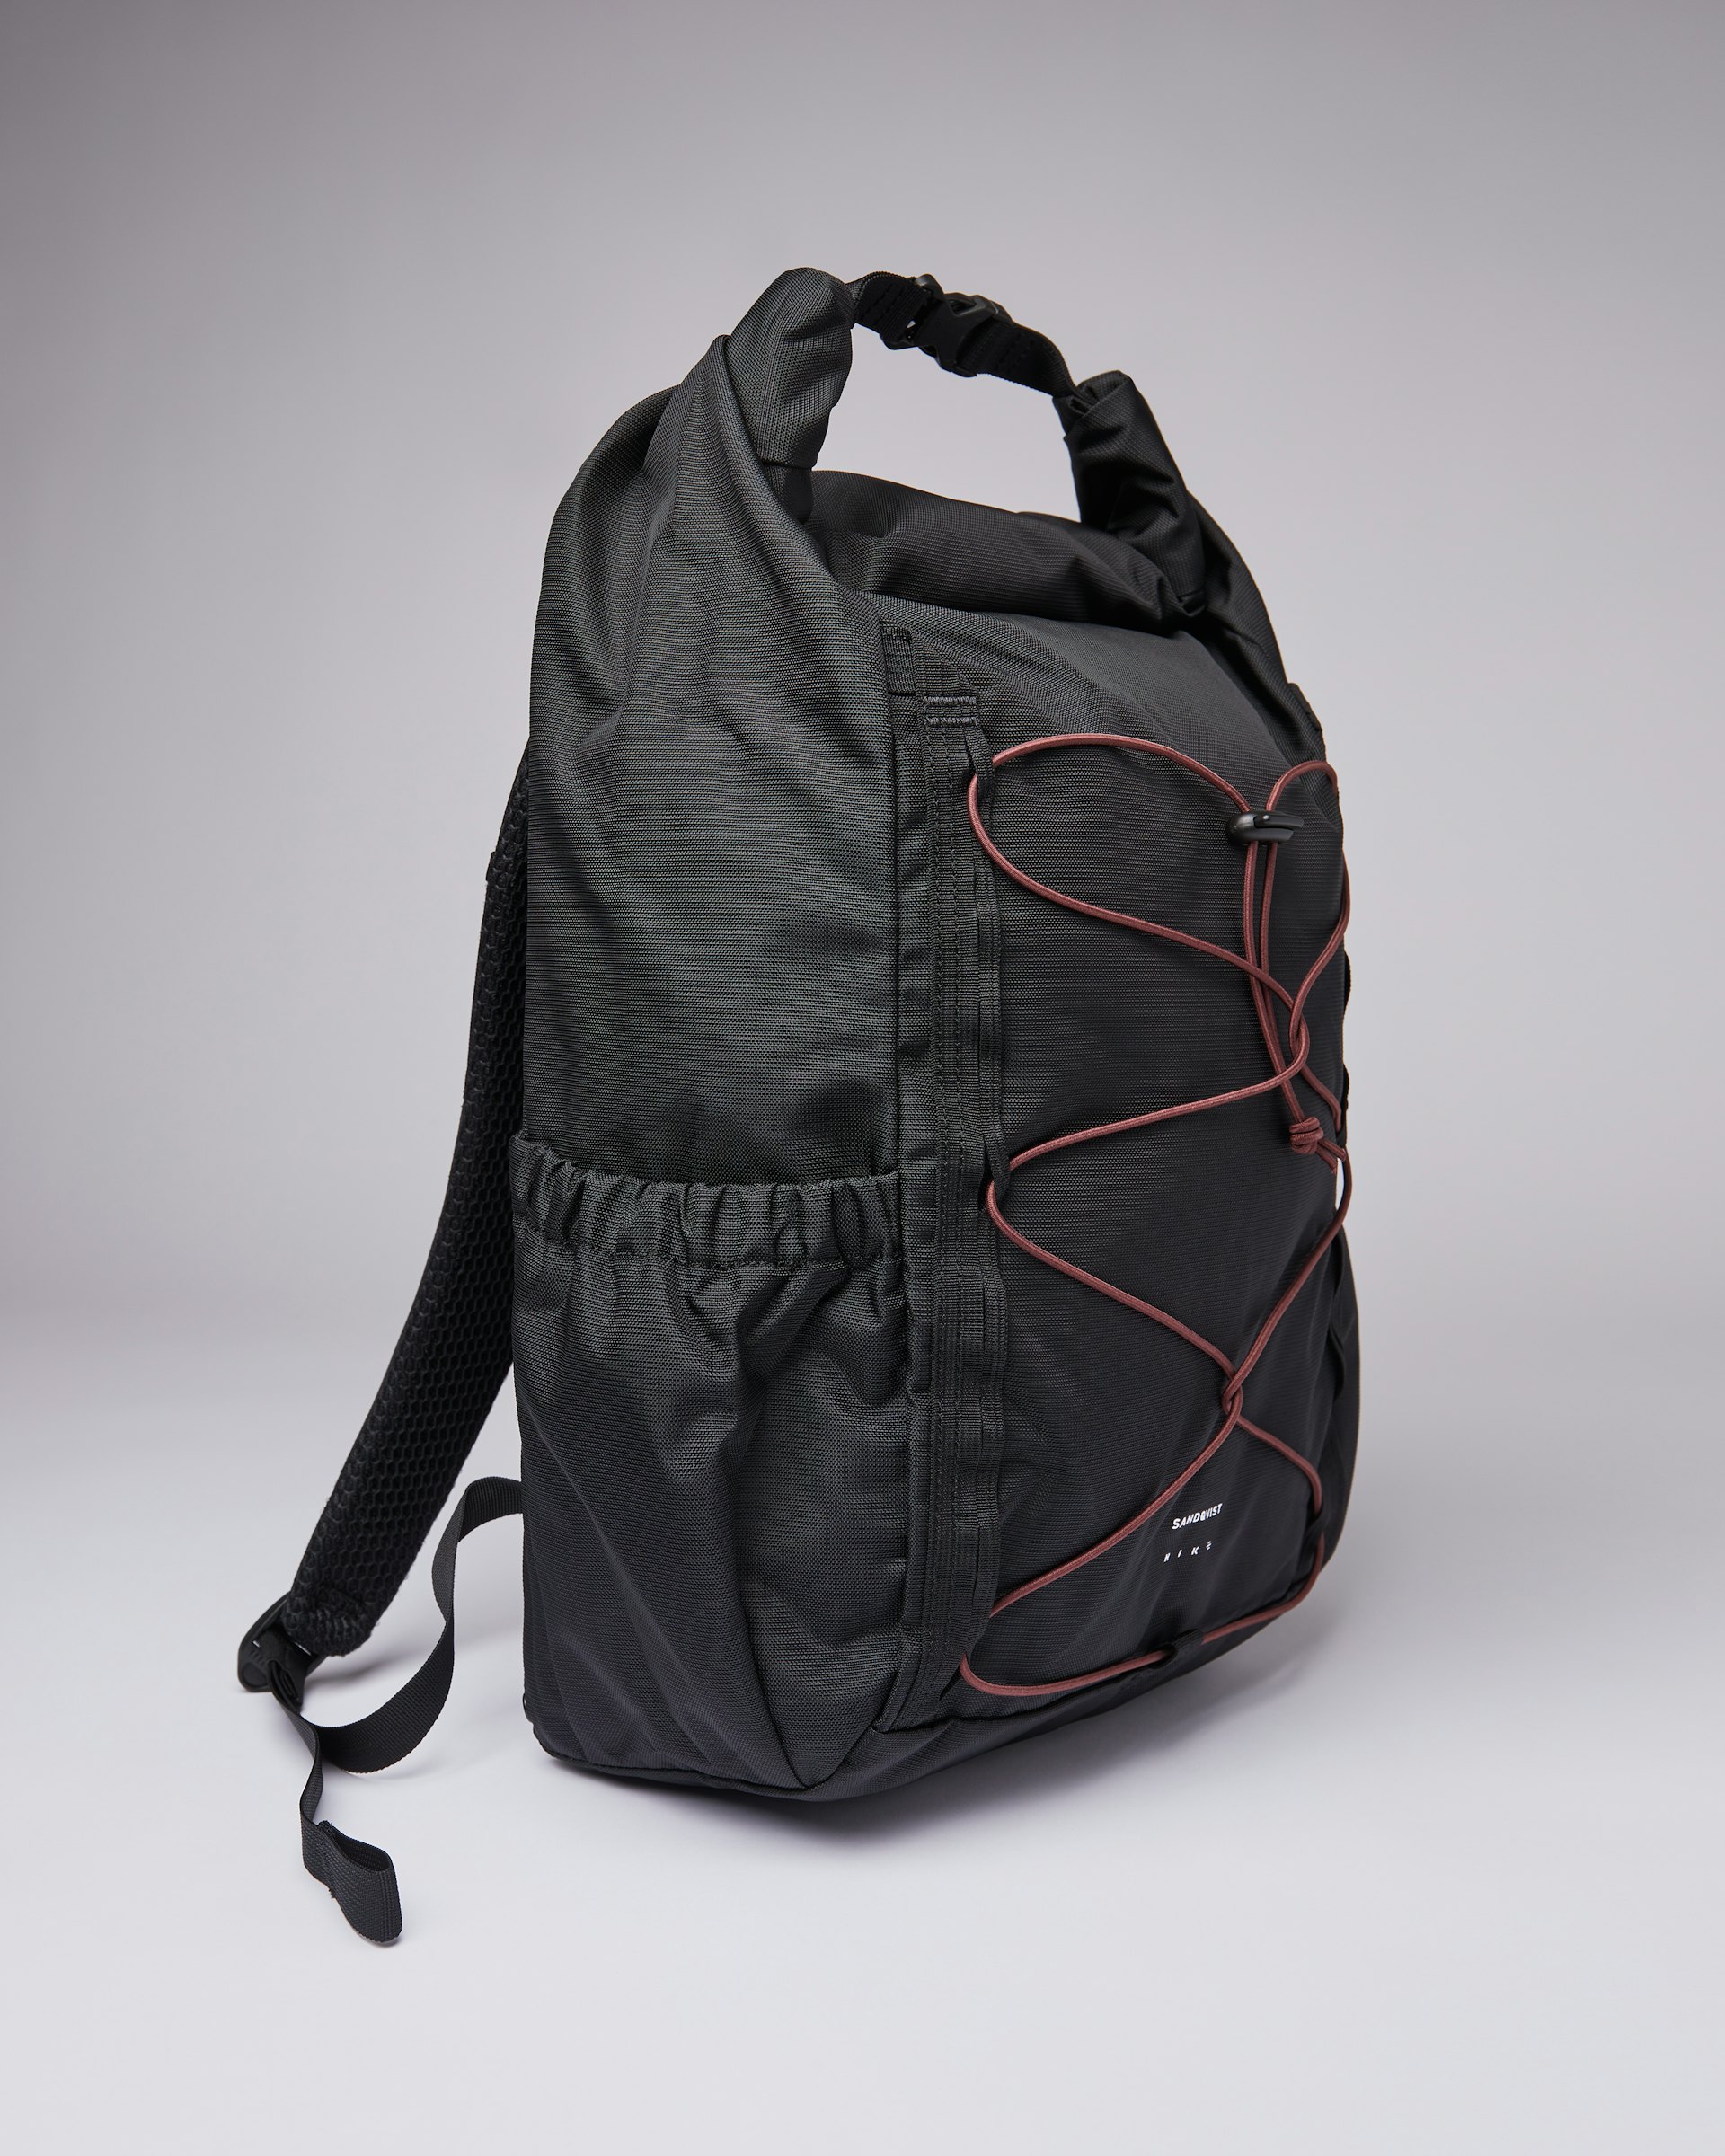 Valley Hike belongs to the category Backpacks and is in color black (4 of 7)